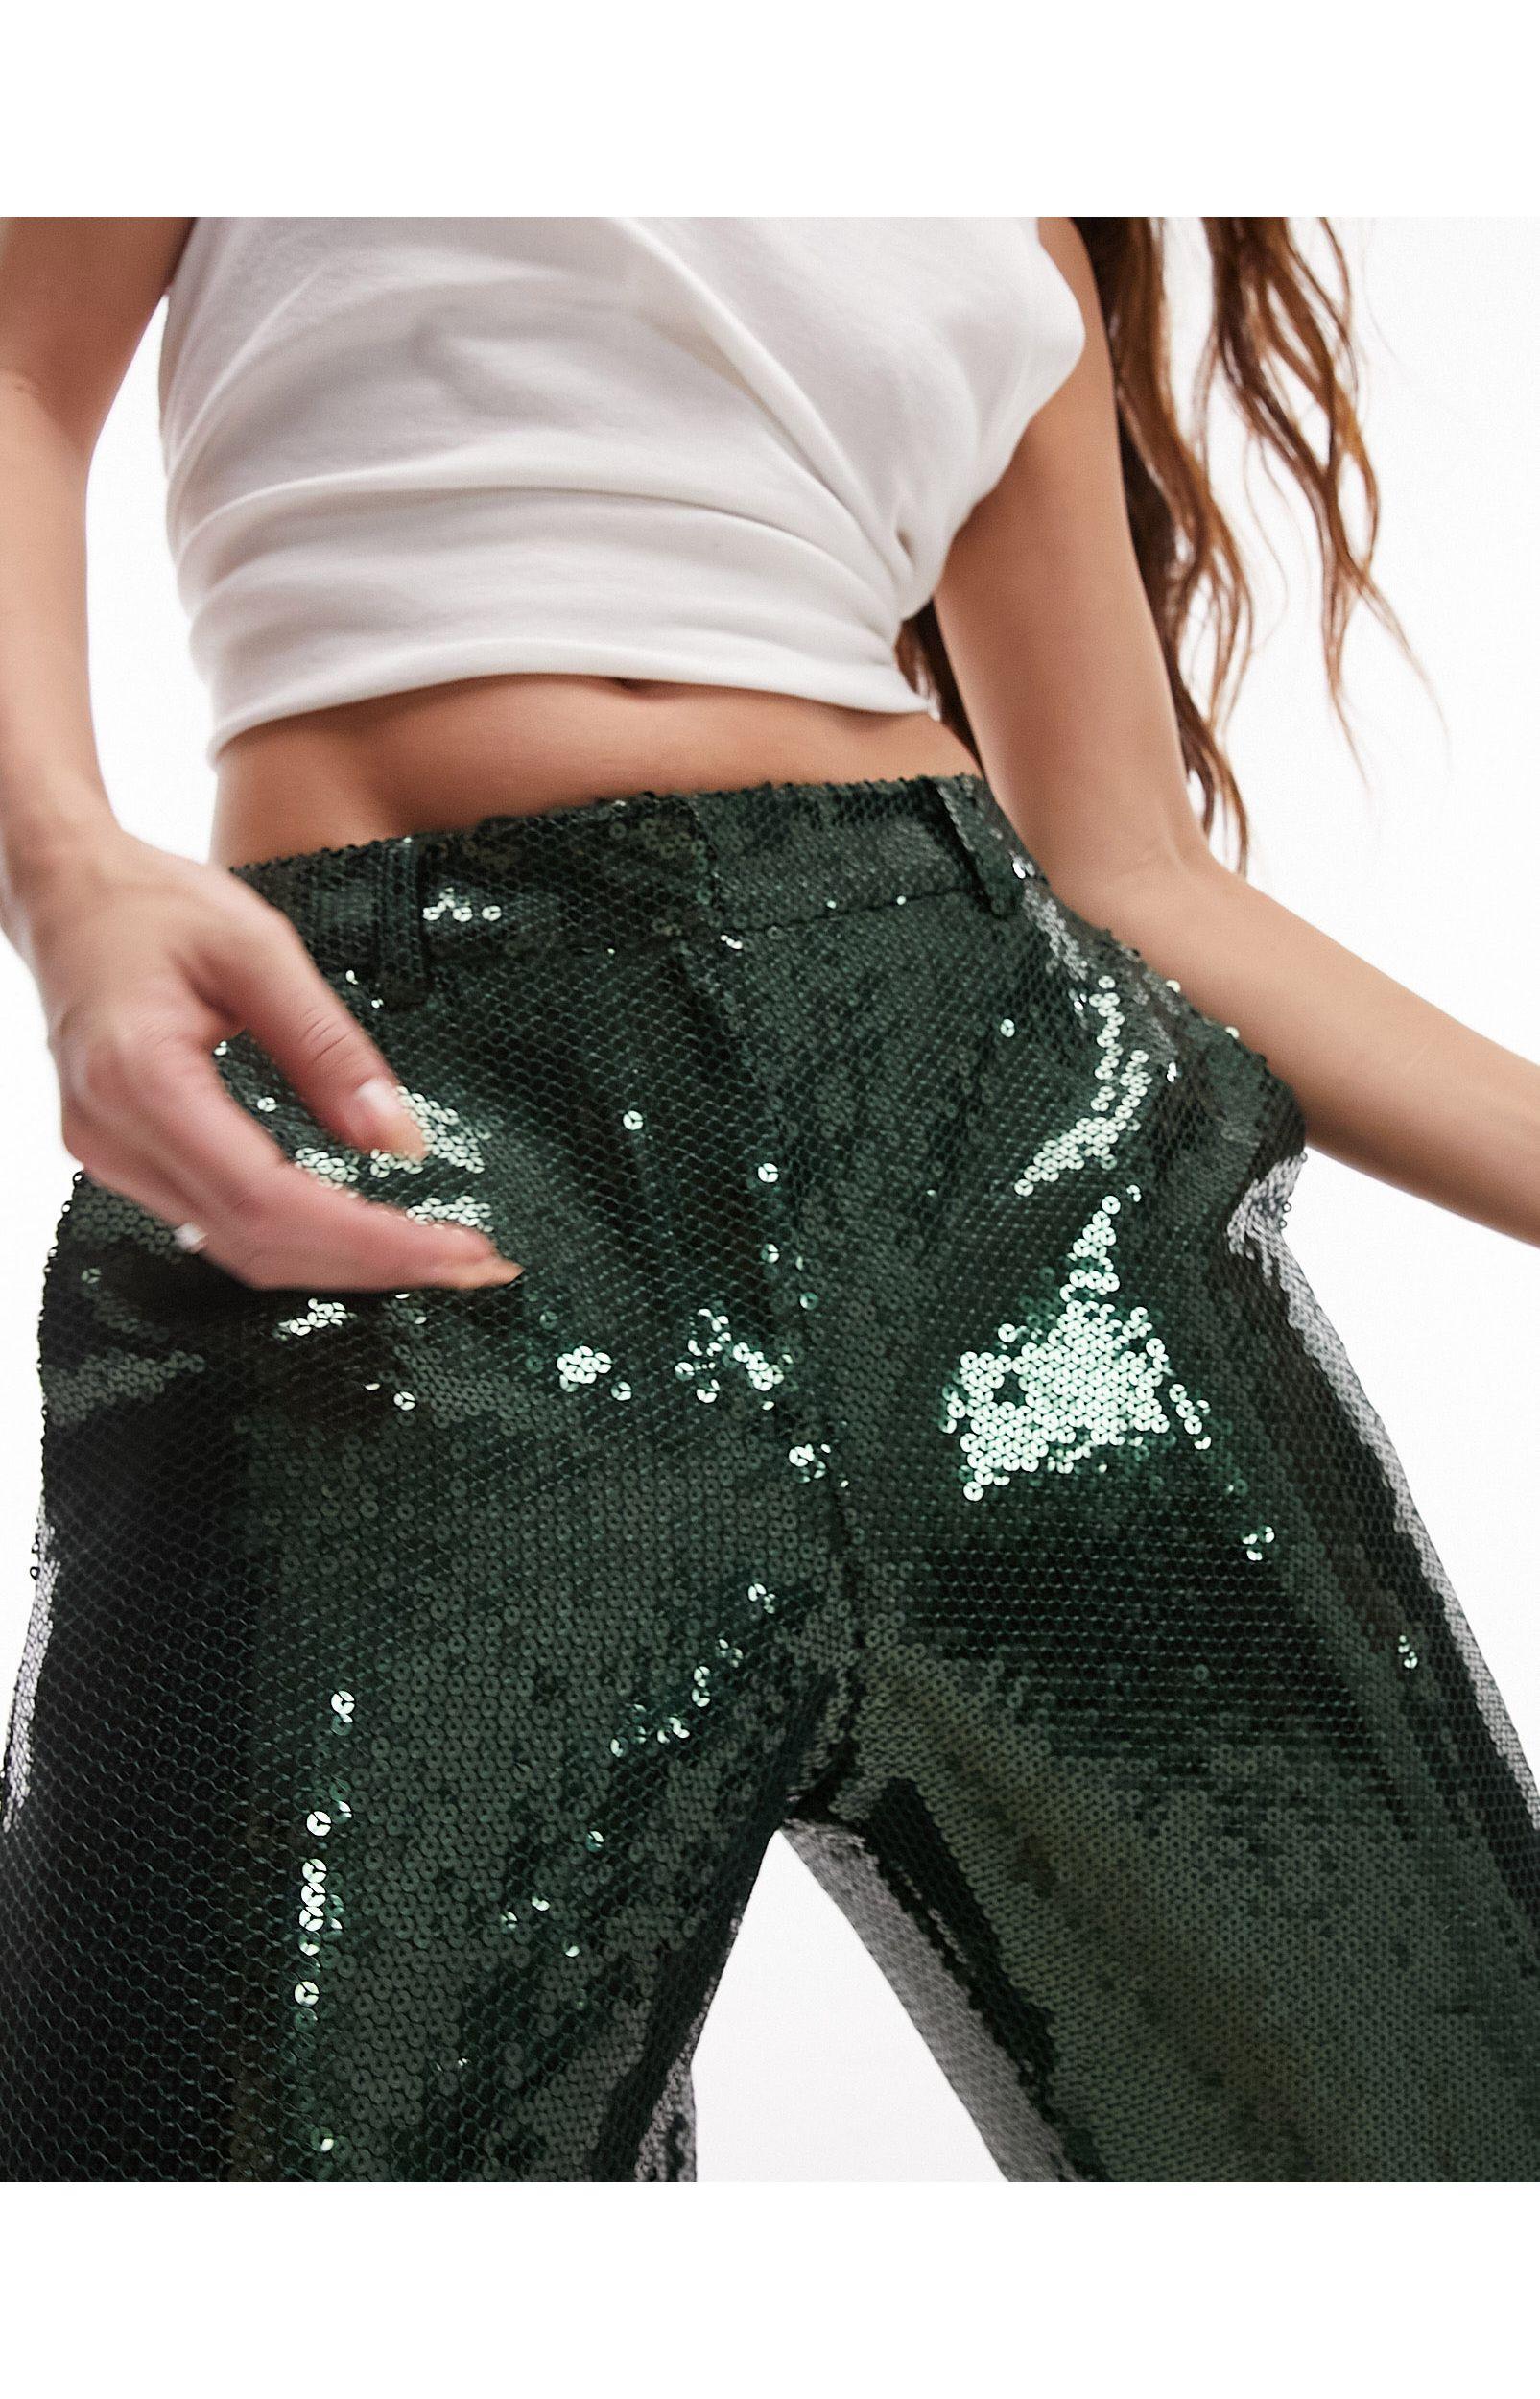 ASOS EDITION sequin crop top and trouser co-ord in green | ASOS